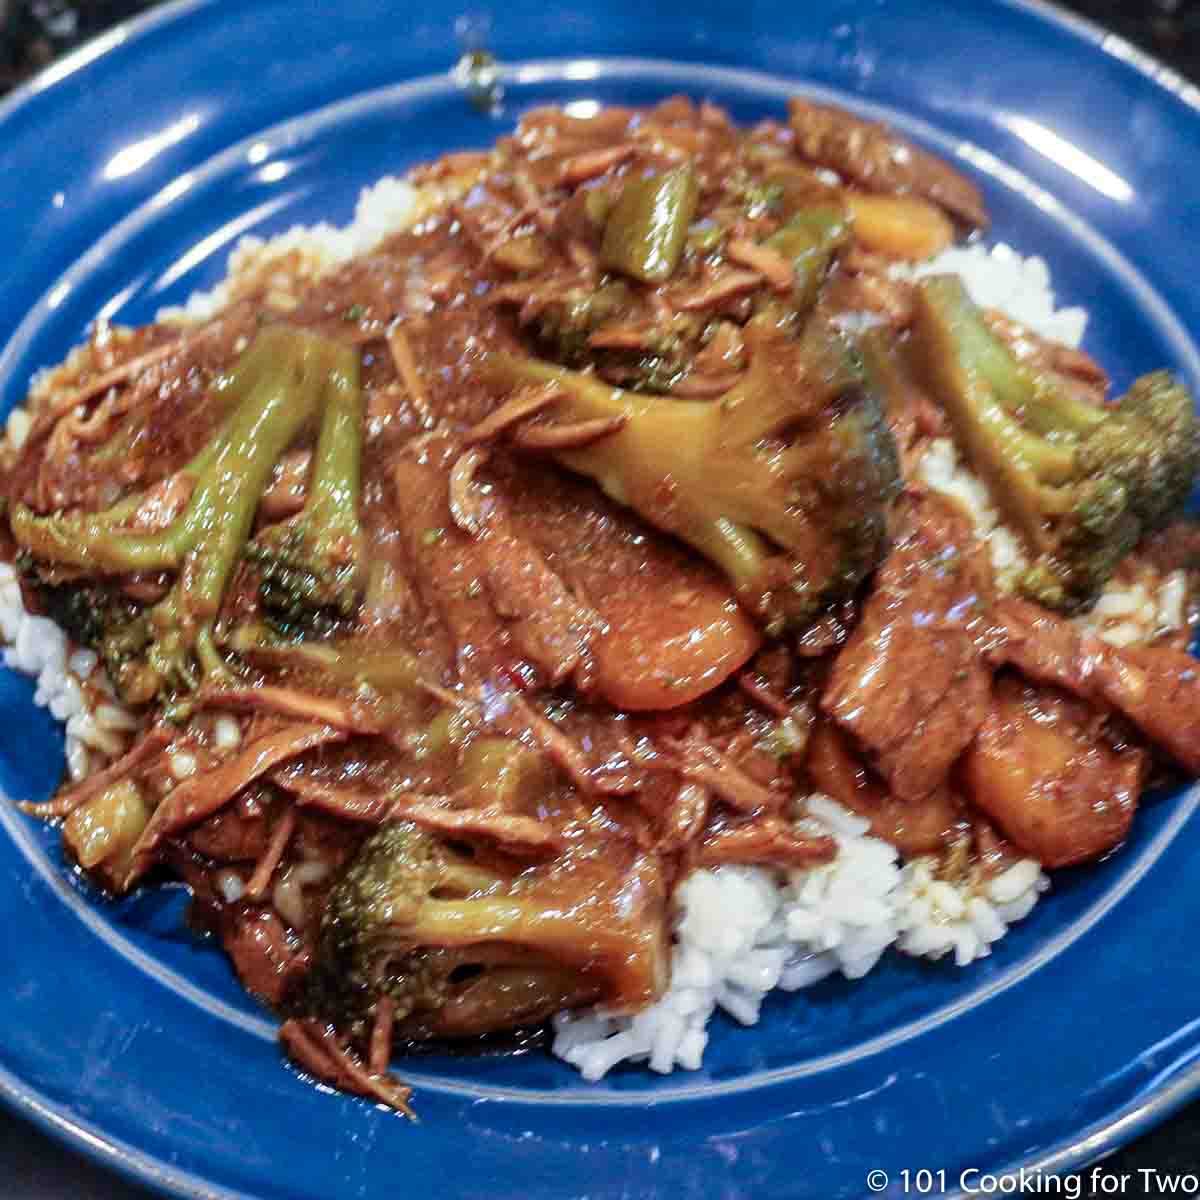 beef and broccoli with rice on blue plate